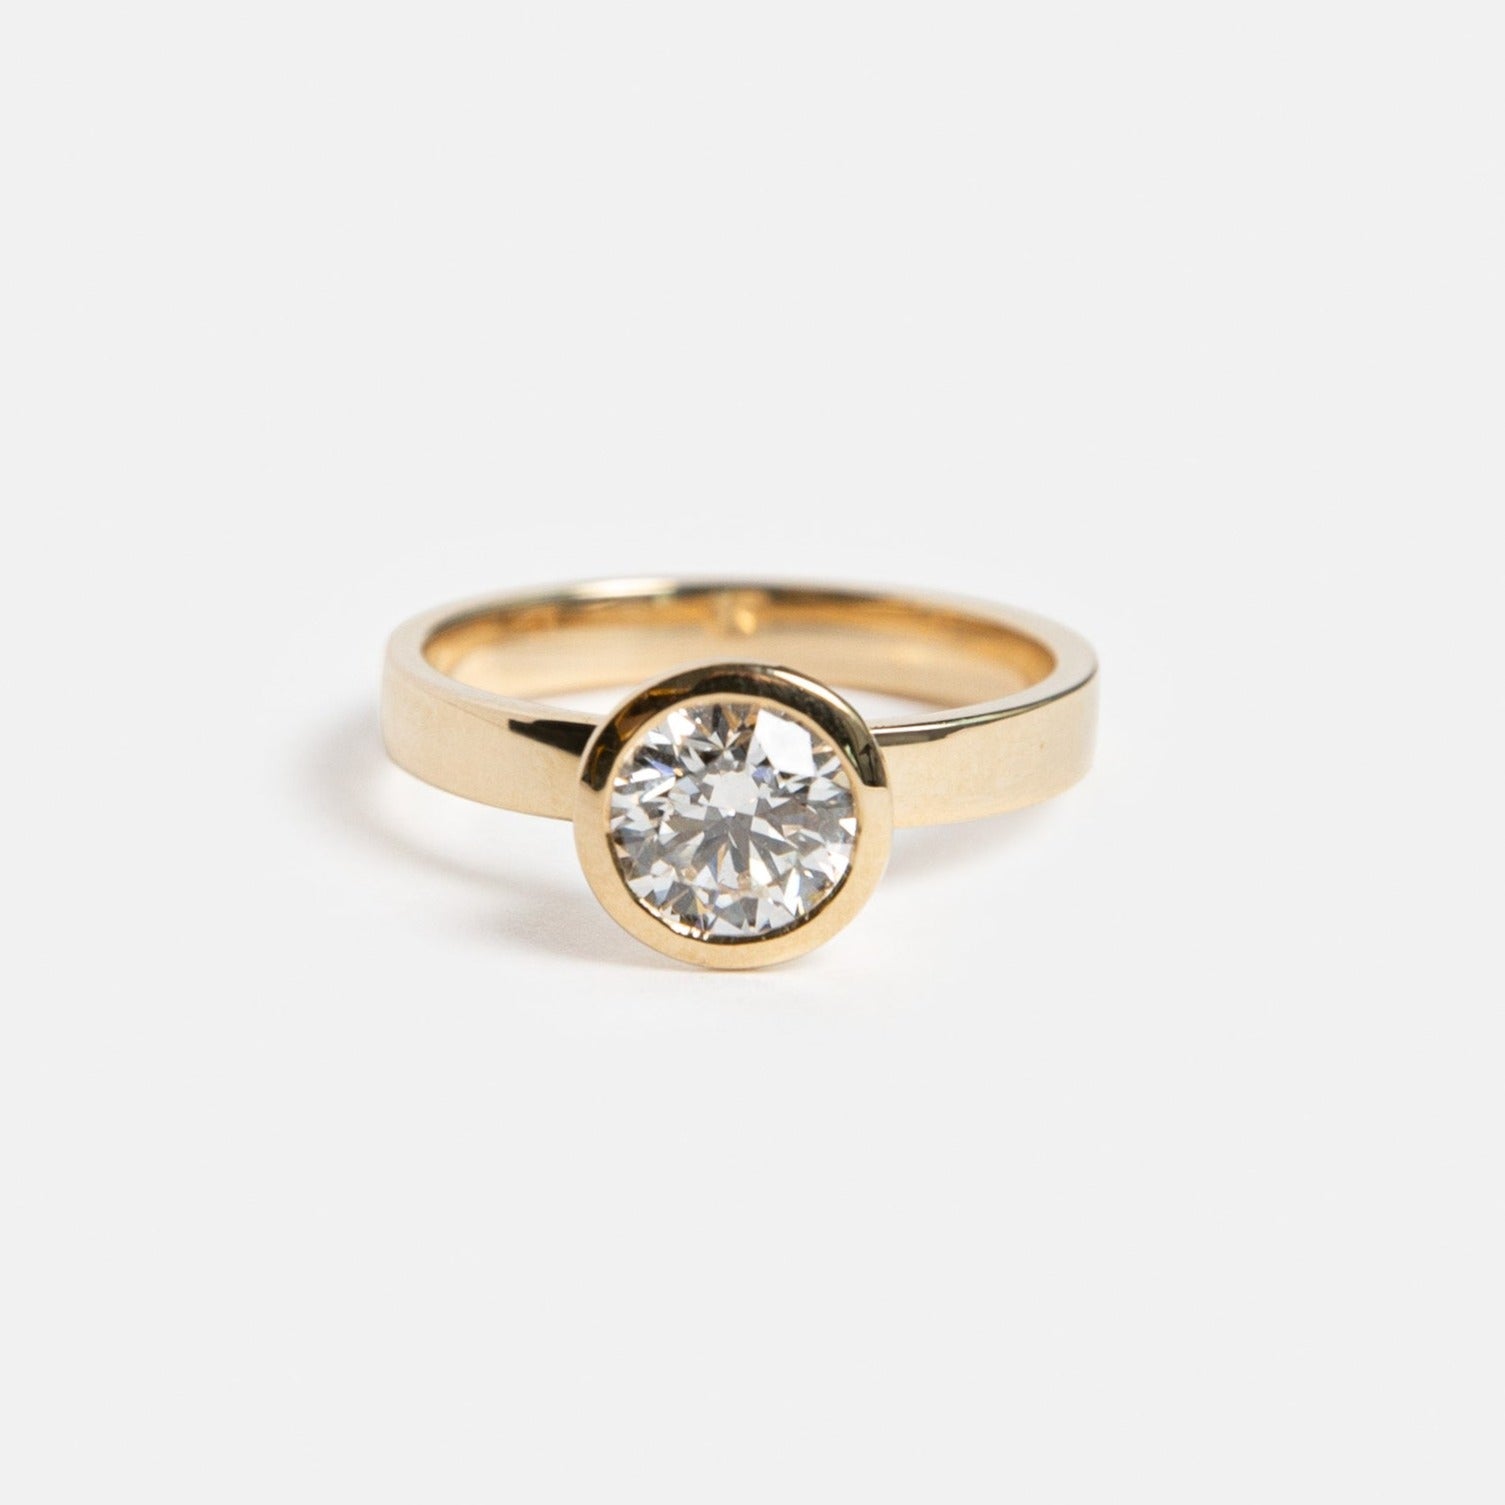 Agne Handmade Ring in 14k Gold set with a 1.03ct round cut lab-grown diamond By SHW Fine Jewelry NYC